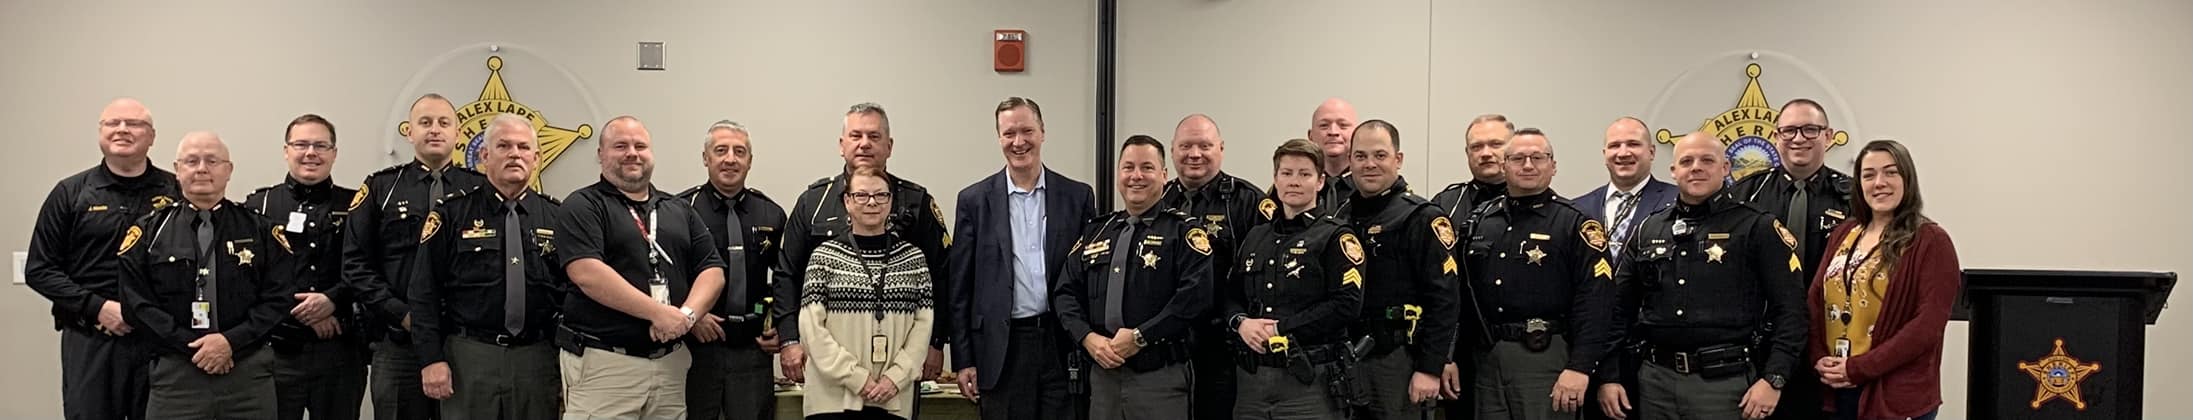 group picture of sheriffs with Steve Stivers